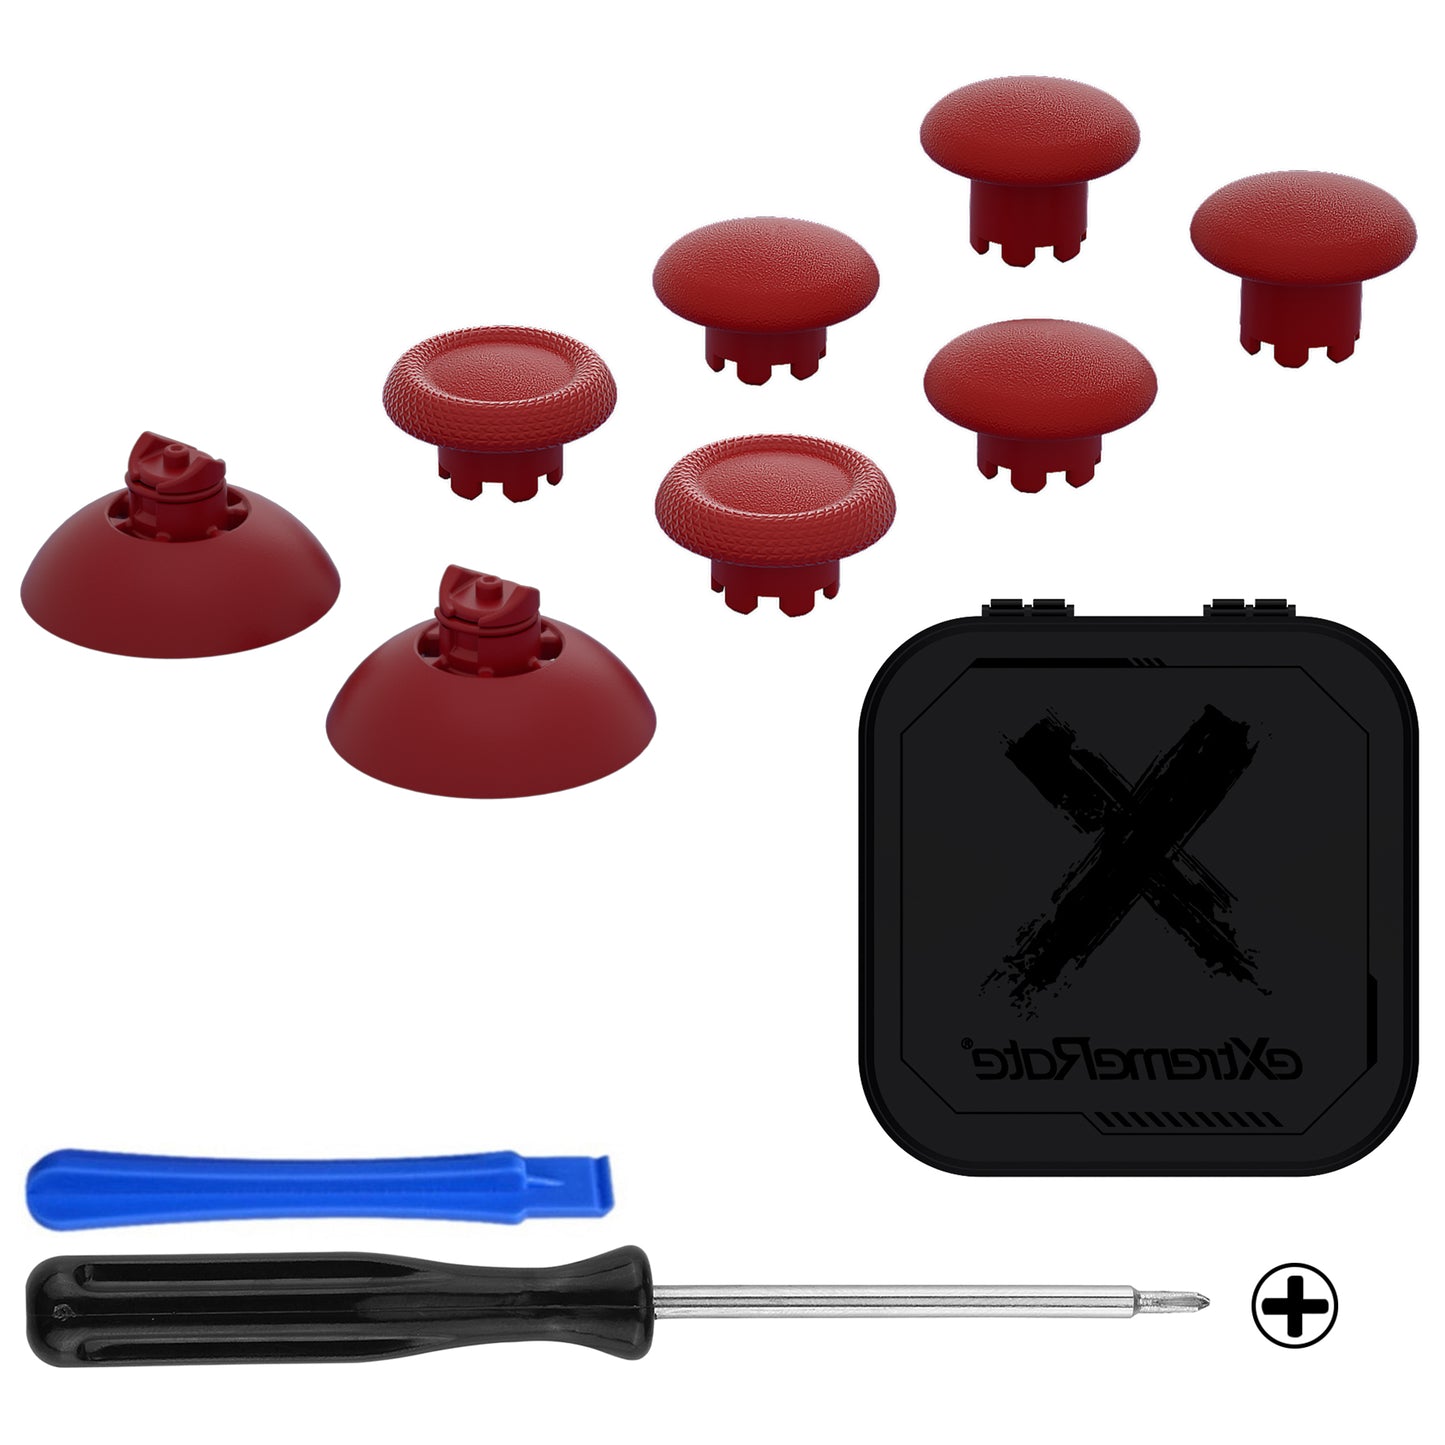 EDGE Sticks Replacement Interchangeable Thumbsticks for PS5 & PS4 All Model Controllers - Carmine Red eXtremeRate